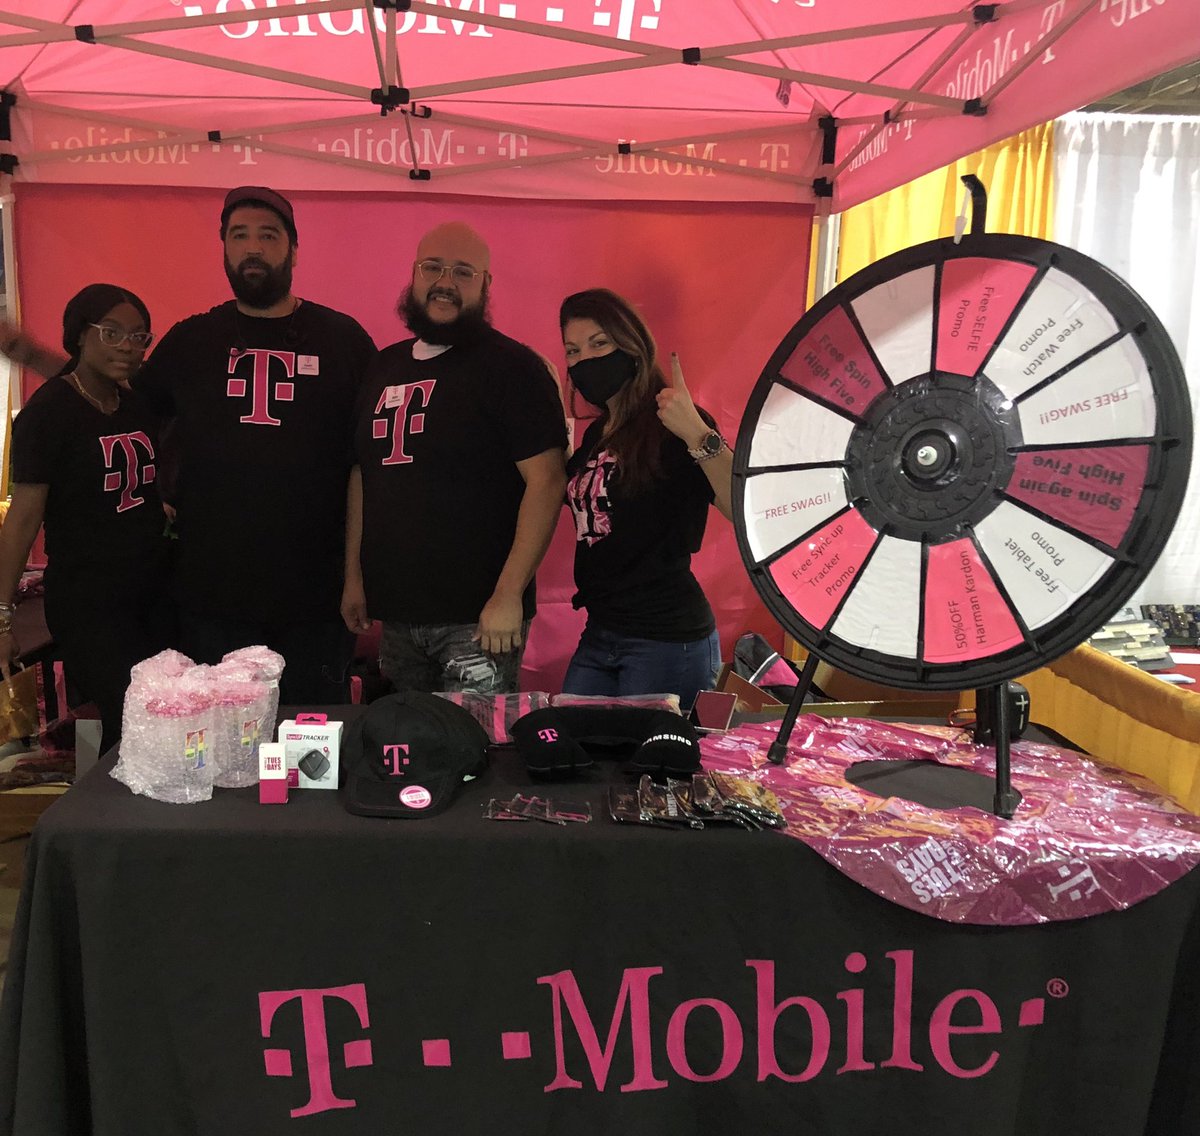 TCC + T-Mobile + Home & Garden Show = Success Thanks for your partnership @TCCMobile We appreciate you! #SeriousFun #TOPTeam @JArienzo @FrankieETCC #Pittsburgh #MidwestMagic #LeaveNoDoubt